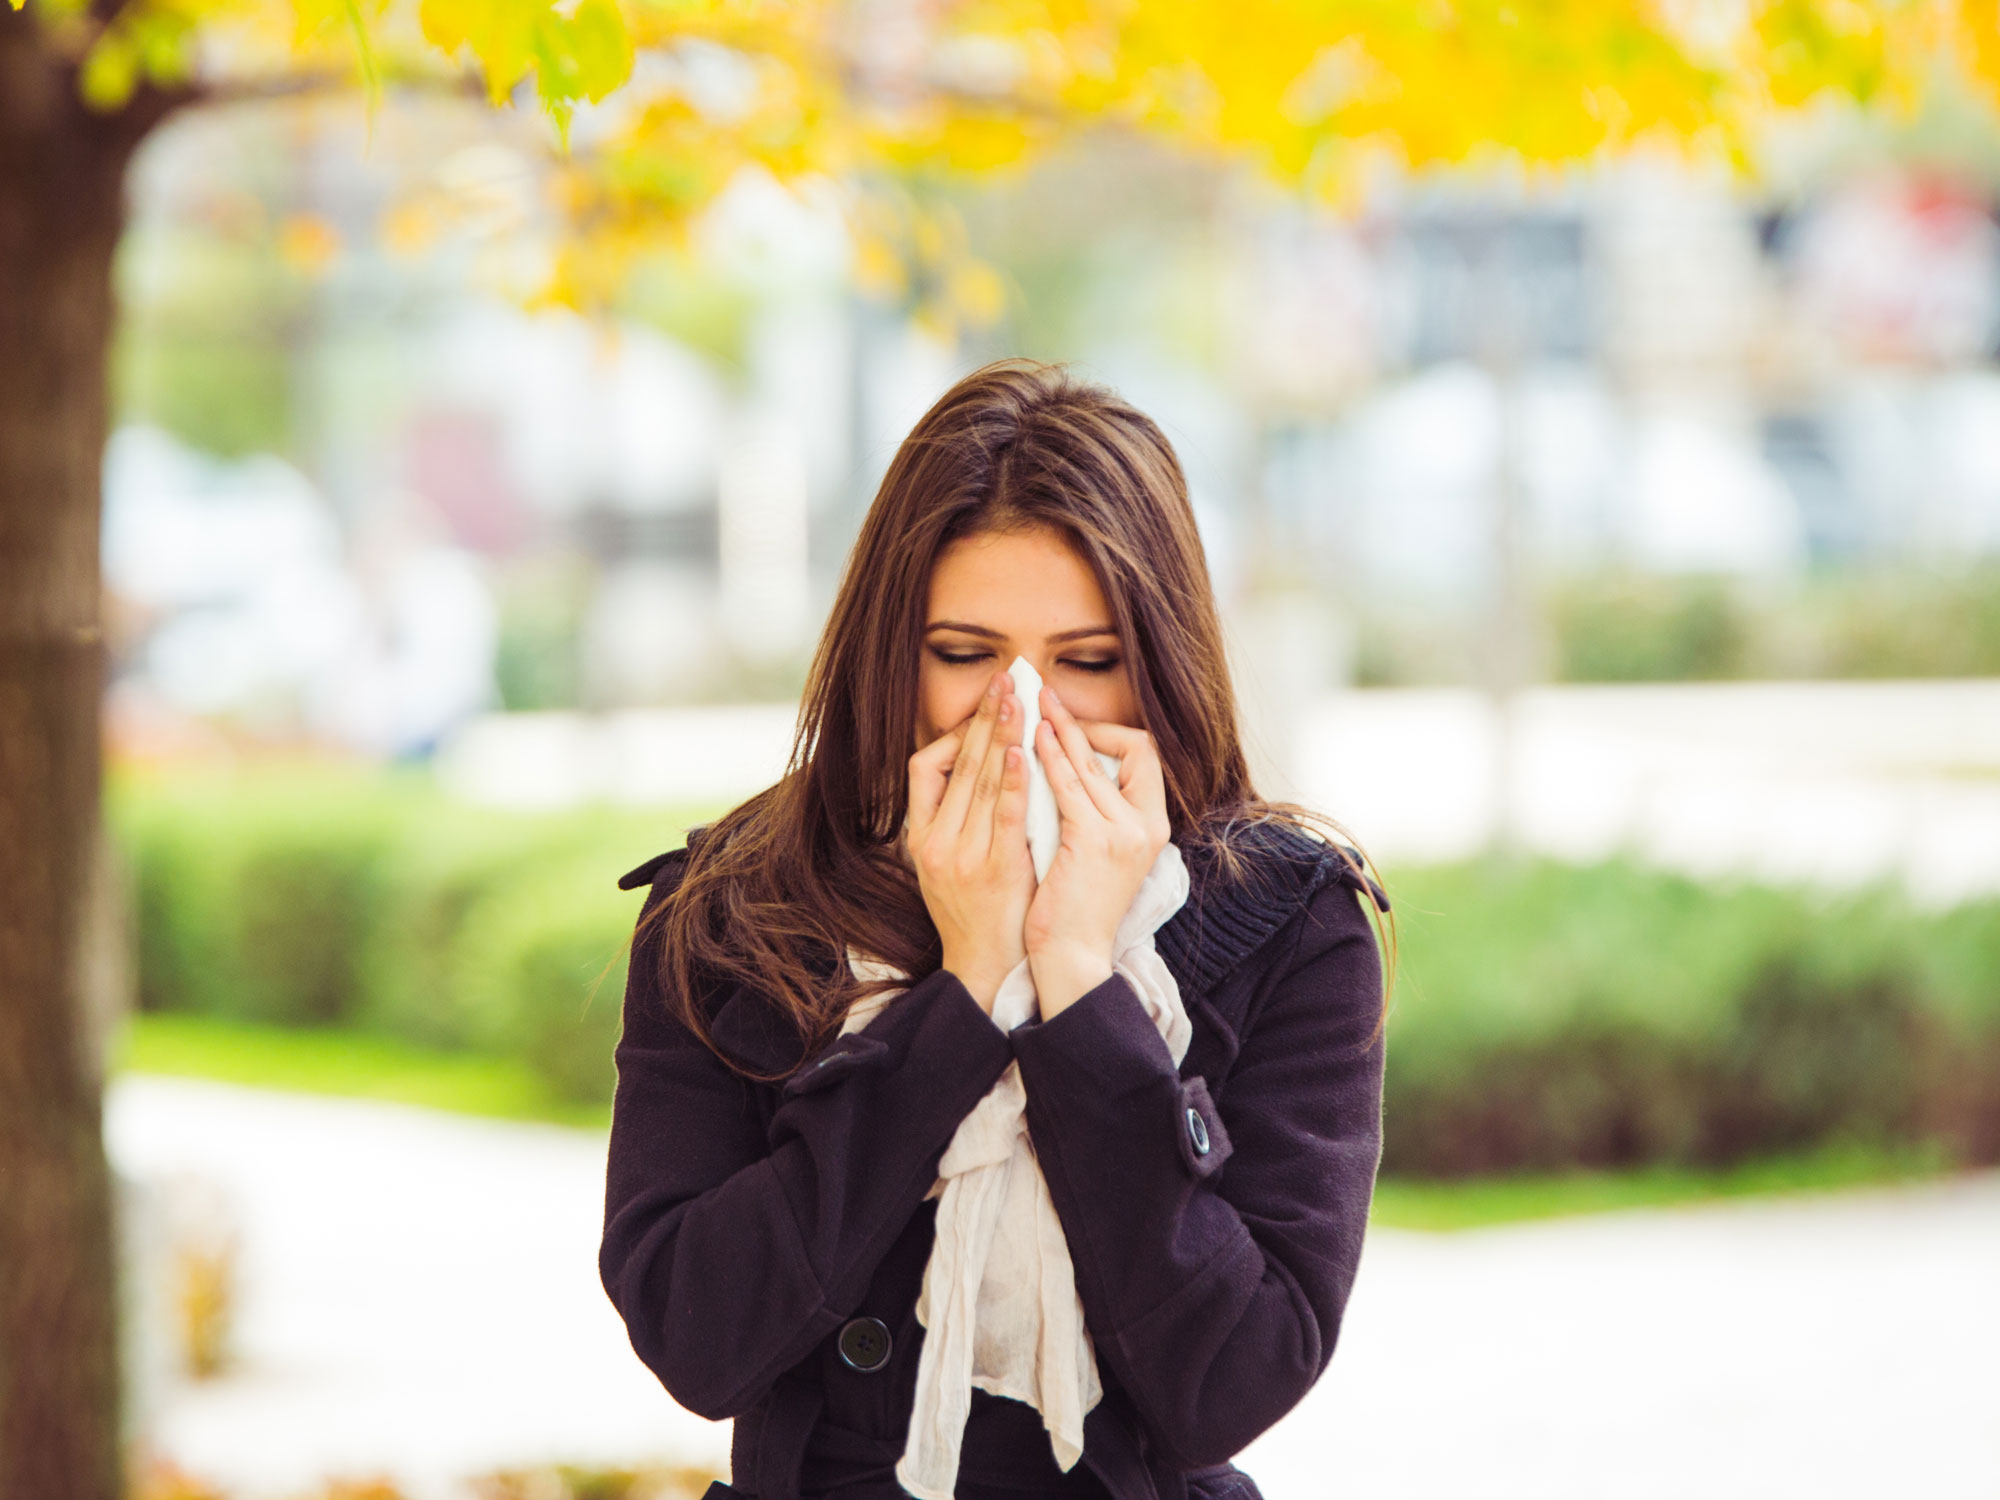 5 Allergy-relieving secrets for every season